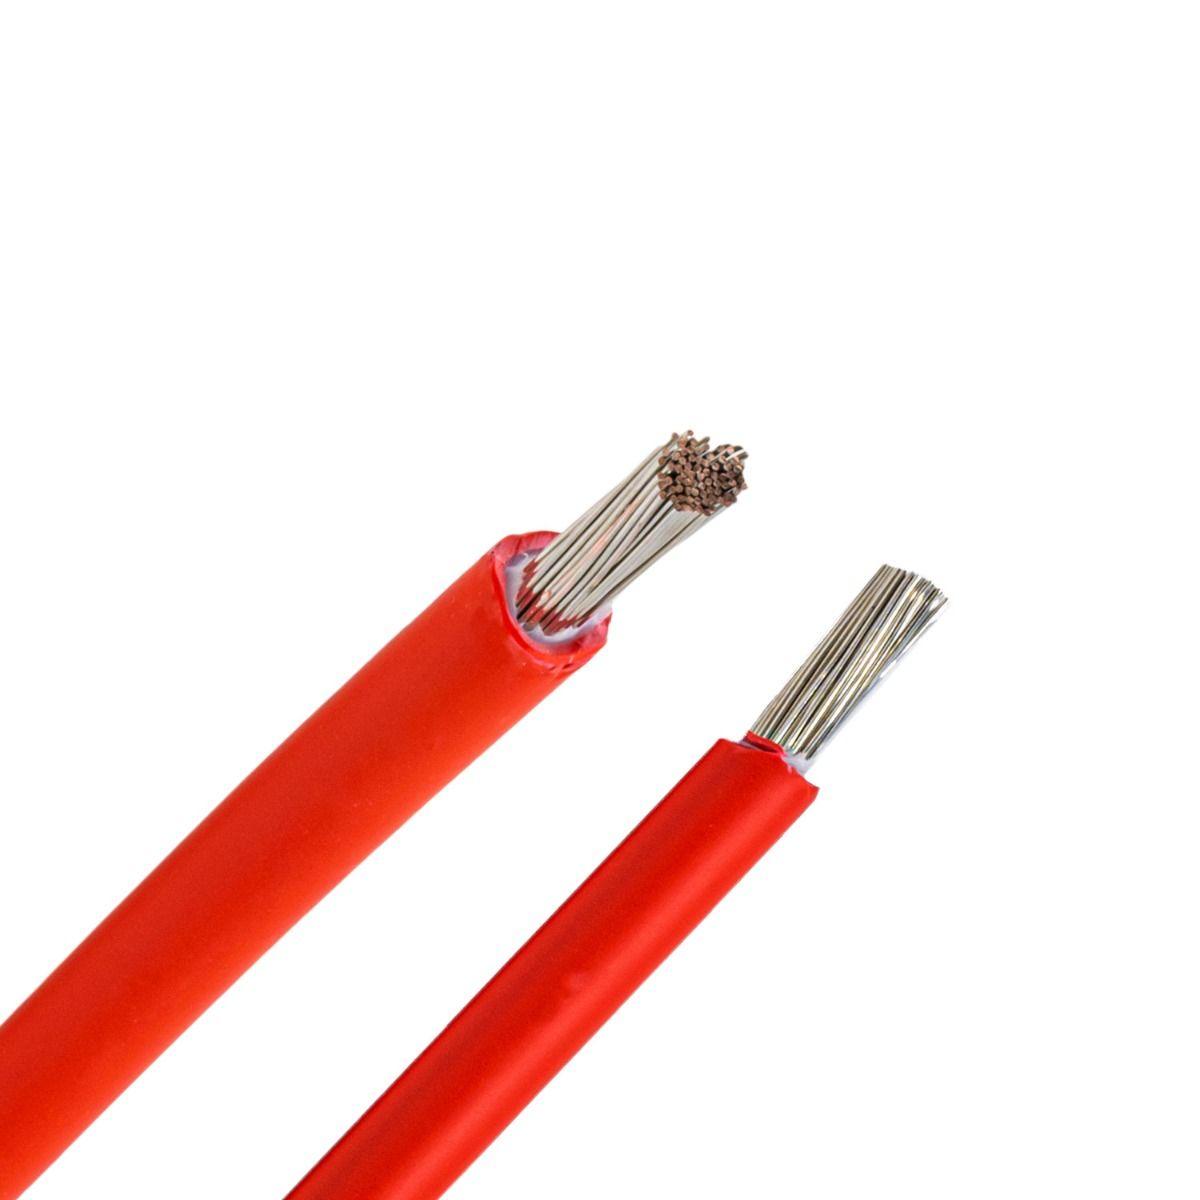 Pair Of 500 Meters 10mm² Drum Flexible Double Insulated Solar Cable Black/Red - VoltaconSolar